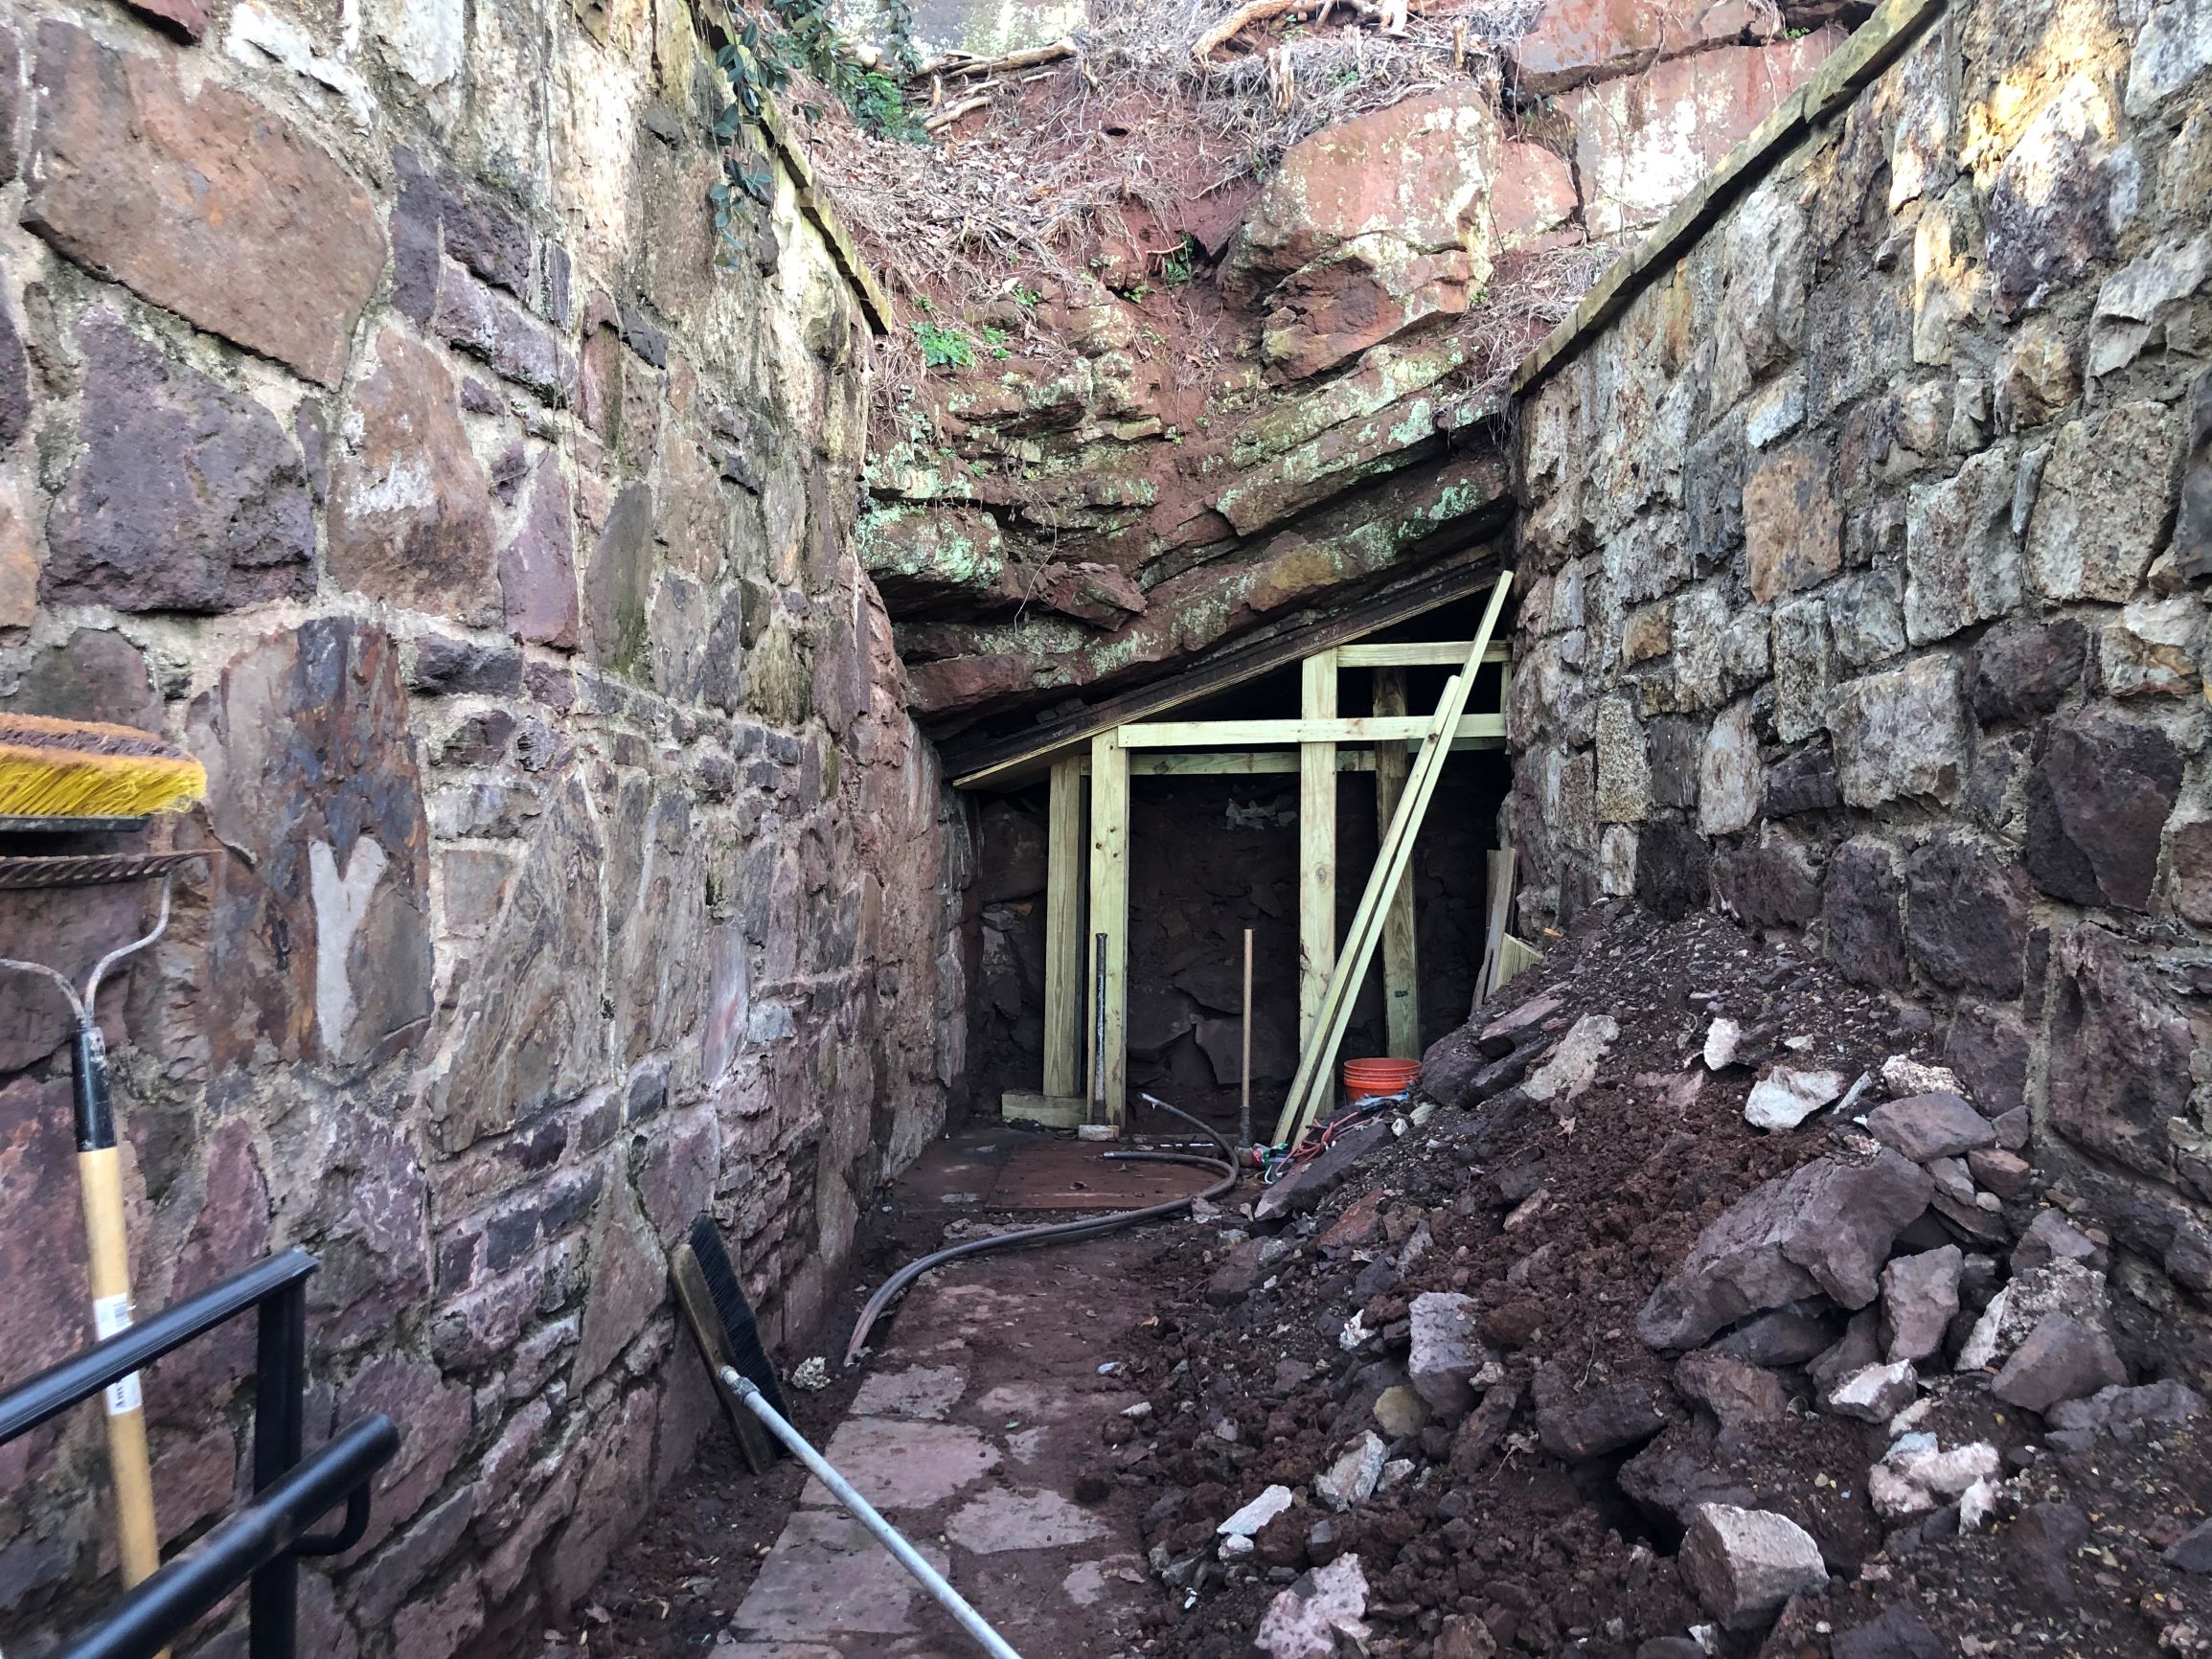 Entrance to mine after demolition of bricks covering opening. Dirt and rocks are piled up on the right side against rock wall. 